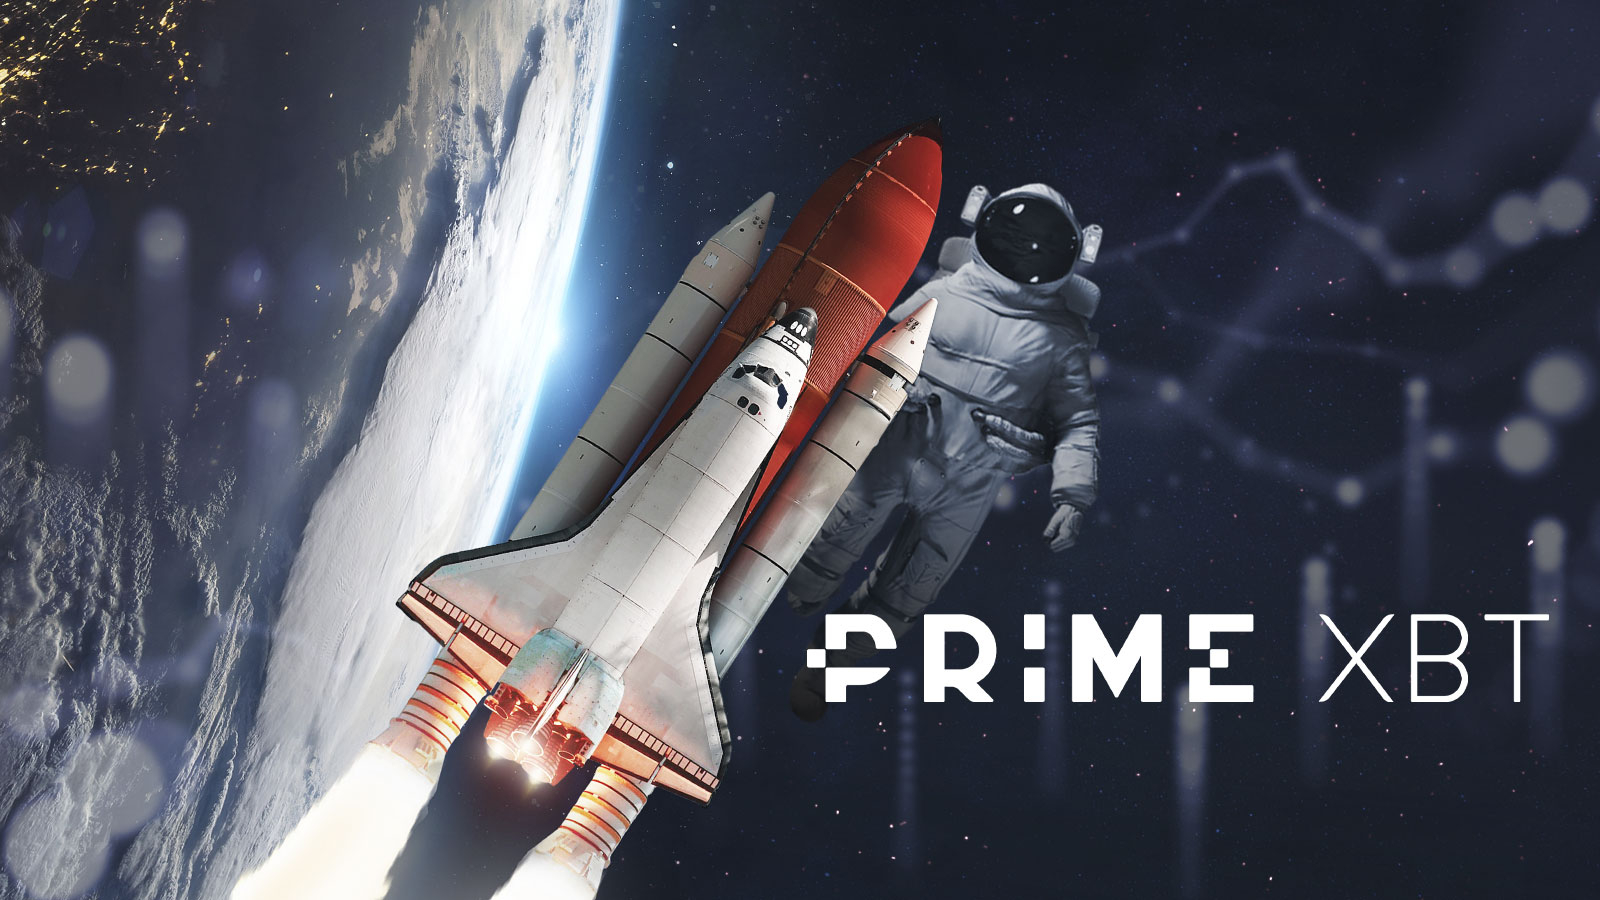 PrimeXBT Introduces Novel Copy Trading Features for Crypto Summer